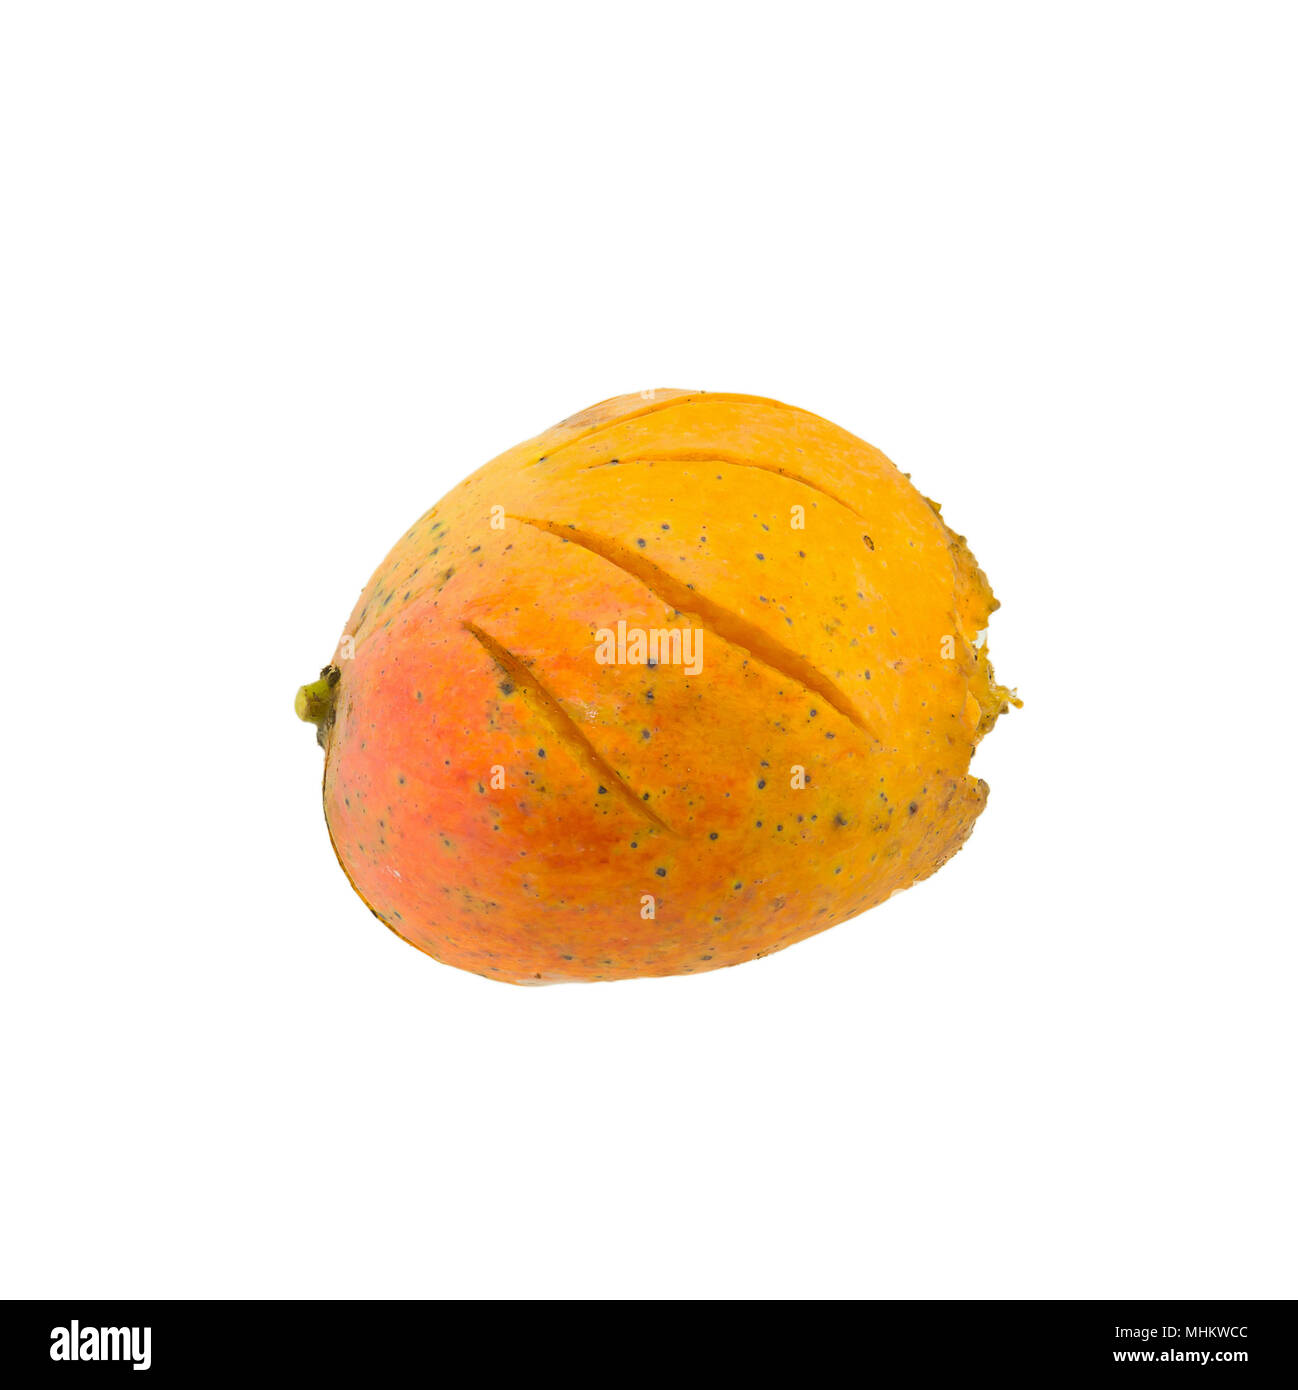 top view rotten mango with worms on a white background Stock Photo - Alamy